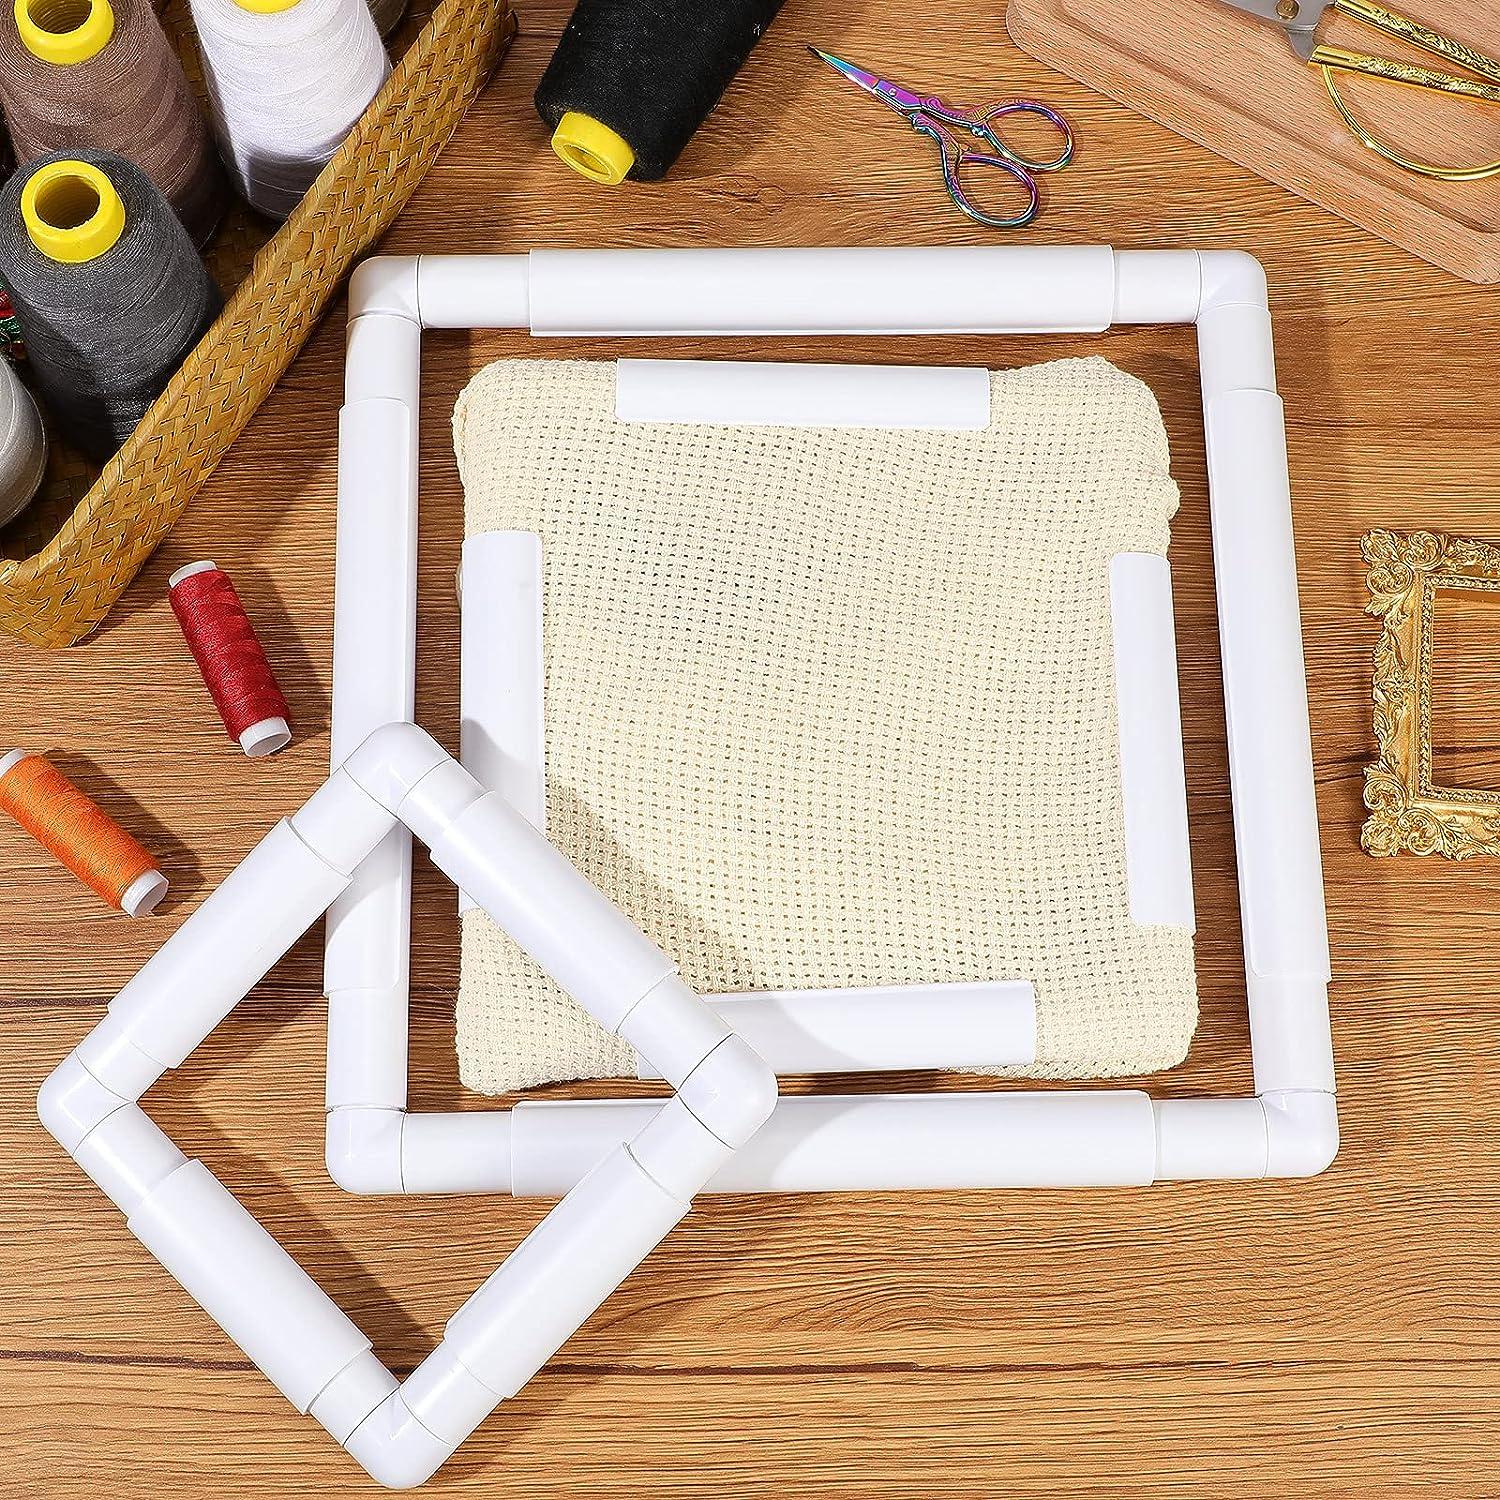 Square Embroidery Hoop 3 Pieces Cross Stitch Hoops and Frames White  Rectangular Cross Stitch Hoop Embroidery Snap Frame DIY Sewing Tools for  Quilting Silk-Painting 6 x 6 8 x 8 11 x 11 Inch